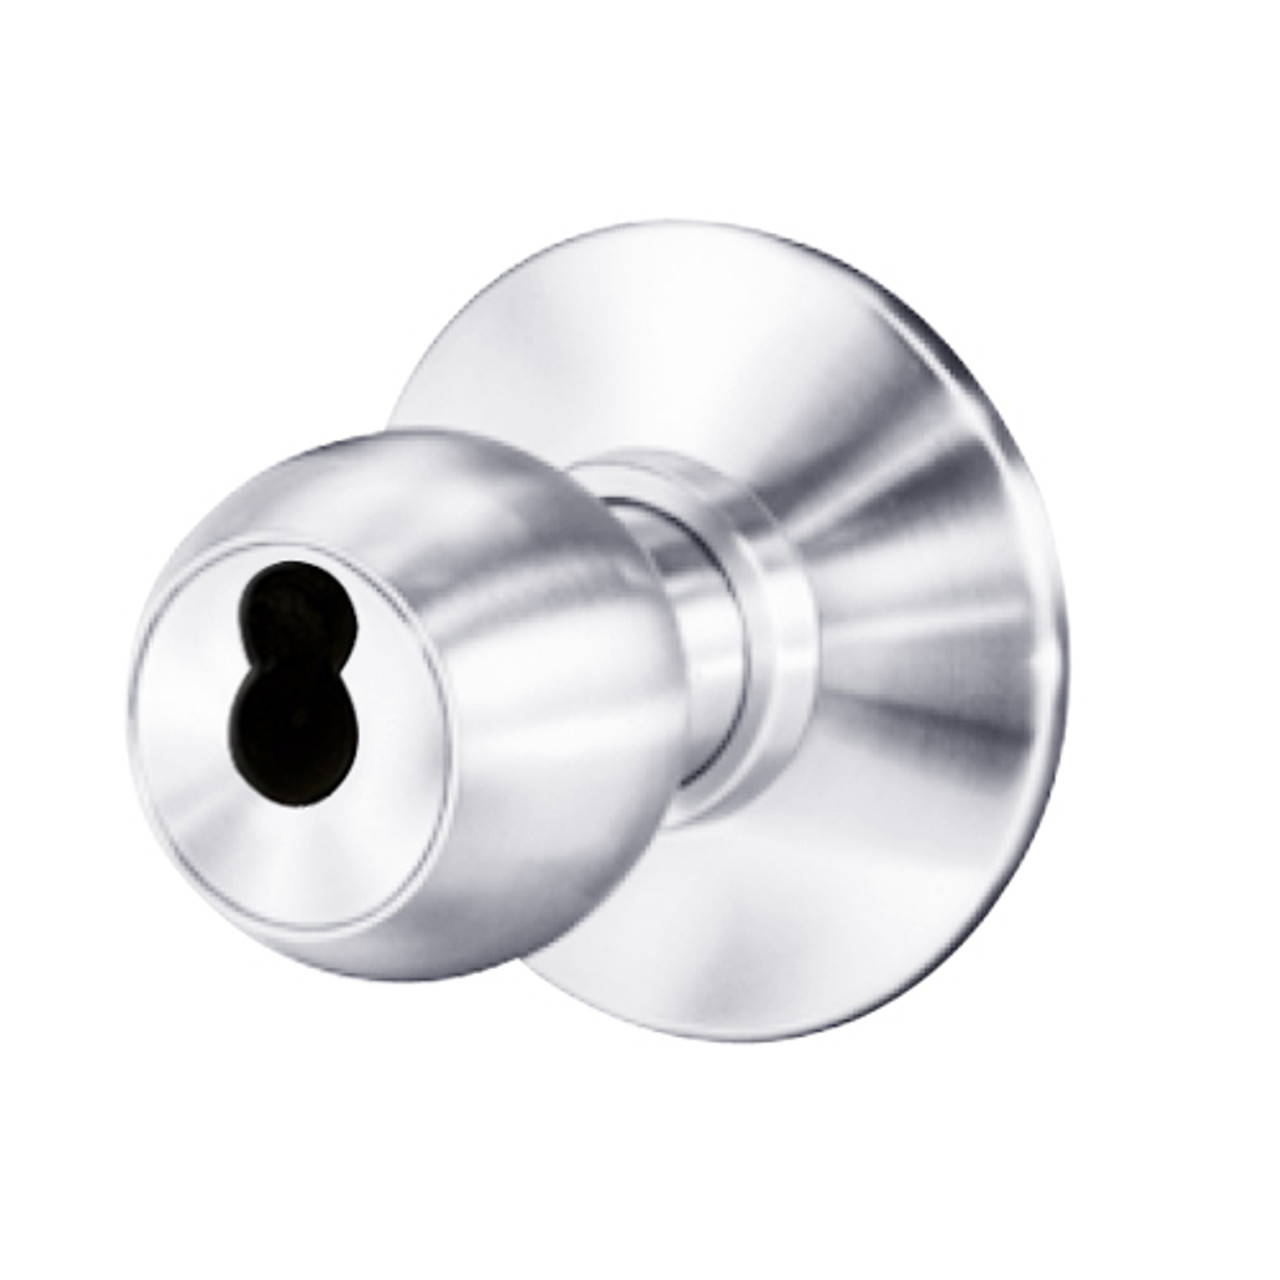 8K57YD4DS3625 Best 8K Series Exit Heavy Duty Cylindrical Knob Locks with Round Style in Bright Chrome